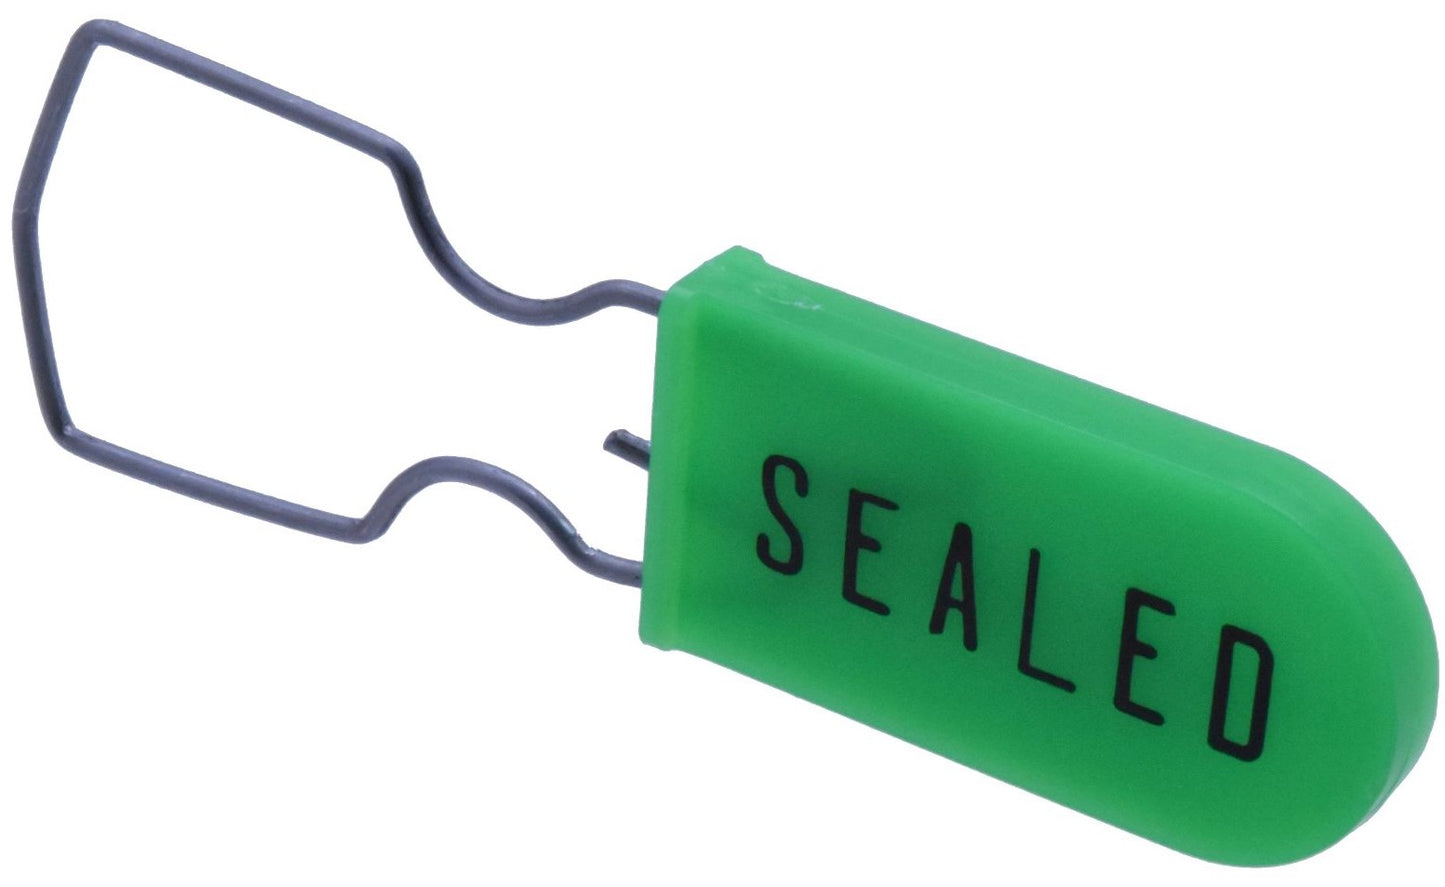 10 Neon Green Key Tag Tamper Seals Compatible with Keyper System